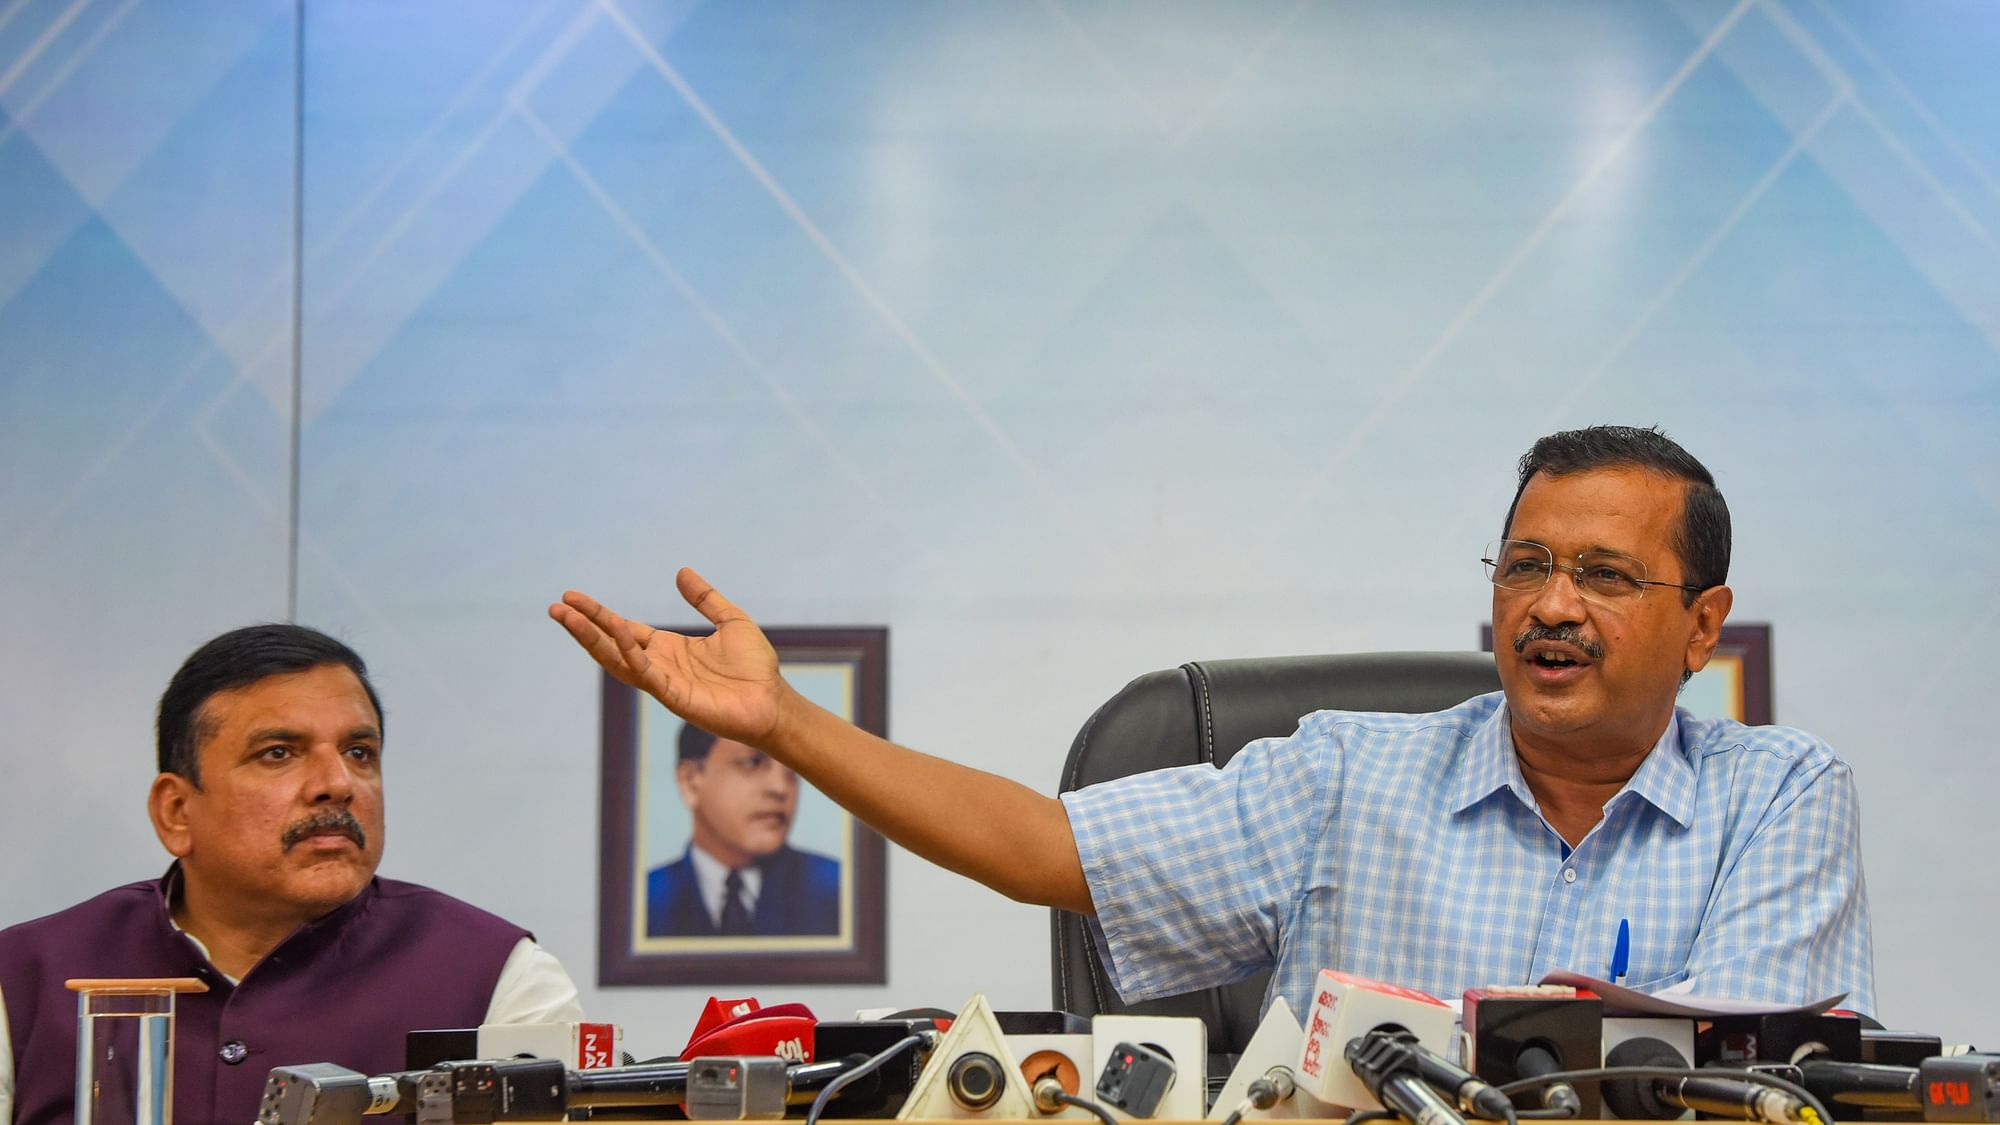 <div class="paragraphs"><p>New Delhi: Delhi Chief Minister Arvind Kejriwal addresses a press conference after CBI summoned him for questioning in the now-scrapped liquor policy case on April 16, in New Delhi, on Saturday, 15 April.&nbsp;</p></div>